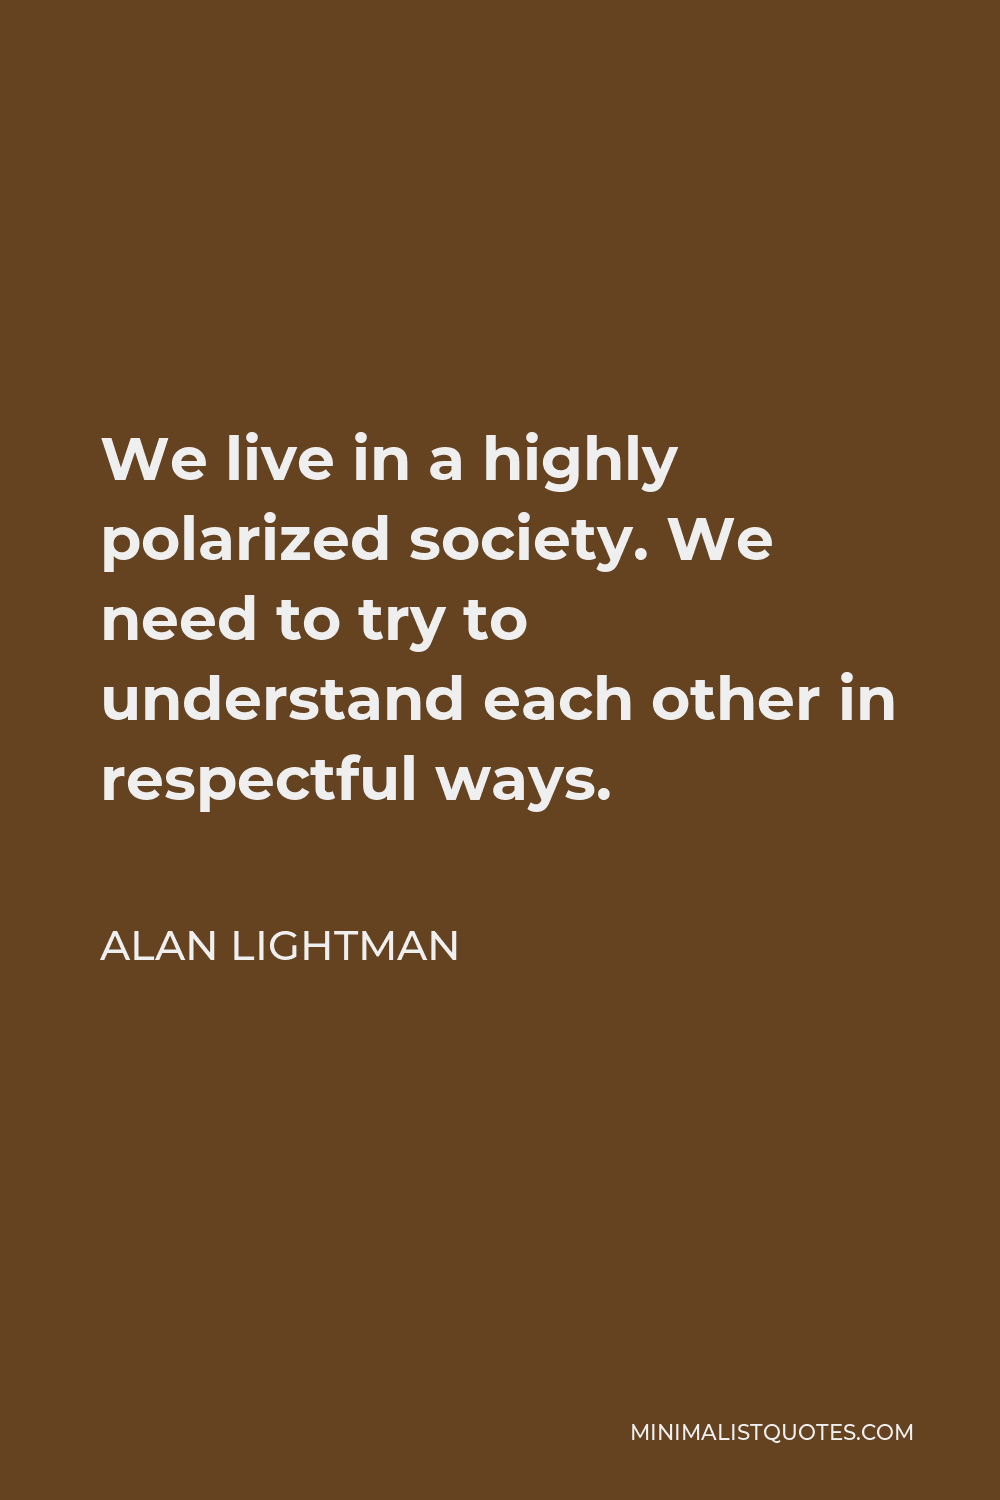 Alan Lightman Quote - We live in a highly polarized society. We need to try to understand each other in respectful ways.